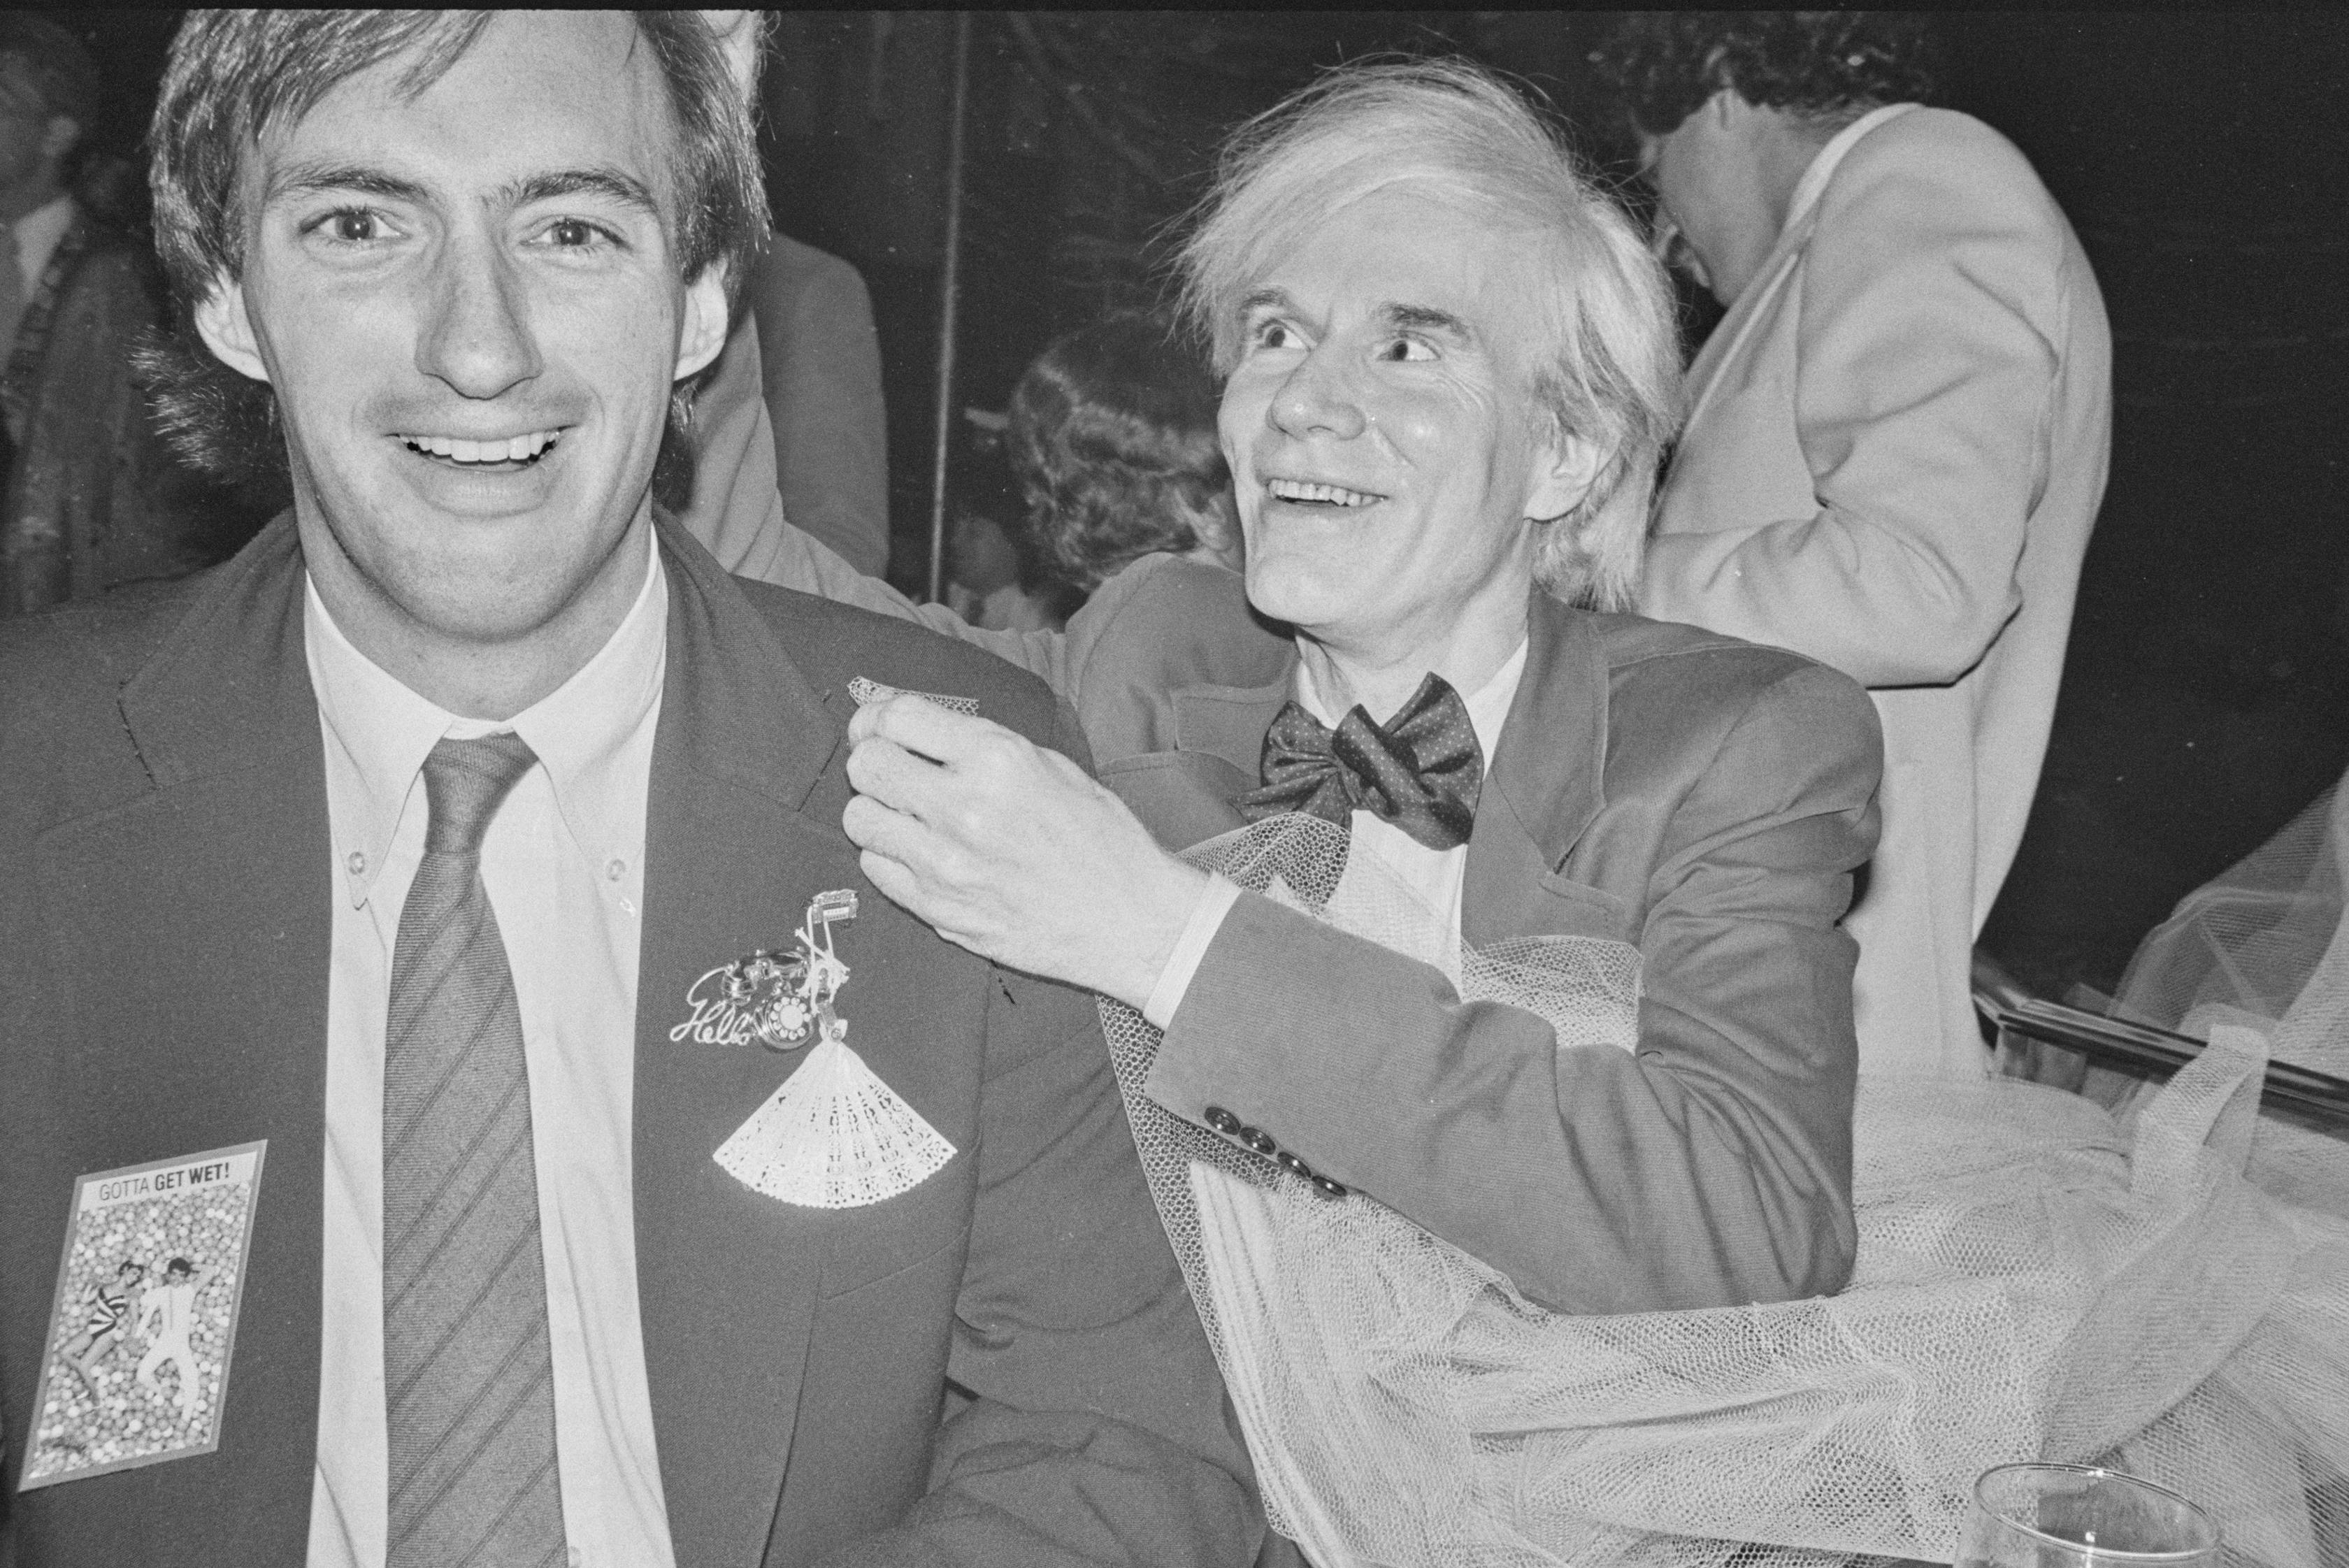 Jon Gould and Andy Warhol sit together. Jon wears a dark blazer with many eccentric pins. Warhol grins and looks at something off camera. He wears a bowtie and a sits in a pool of tulle.